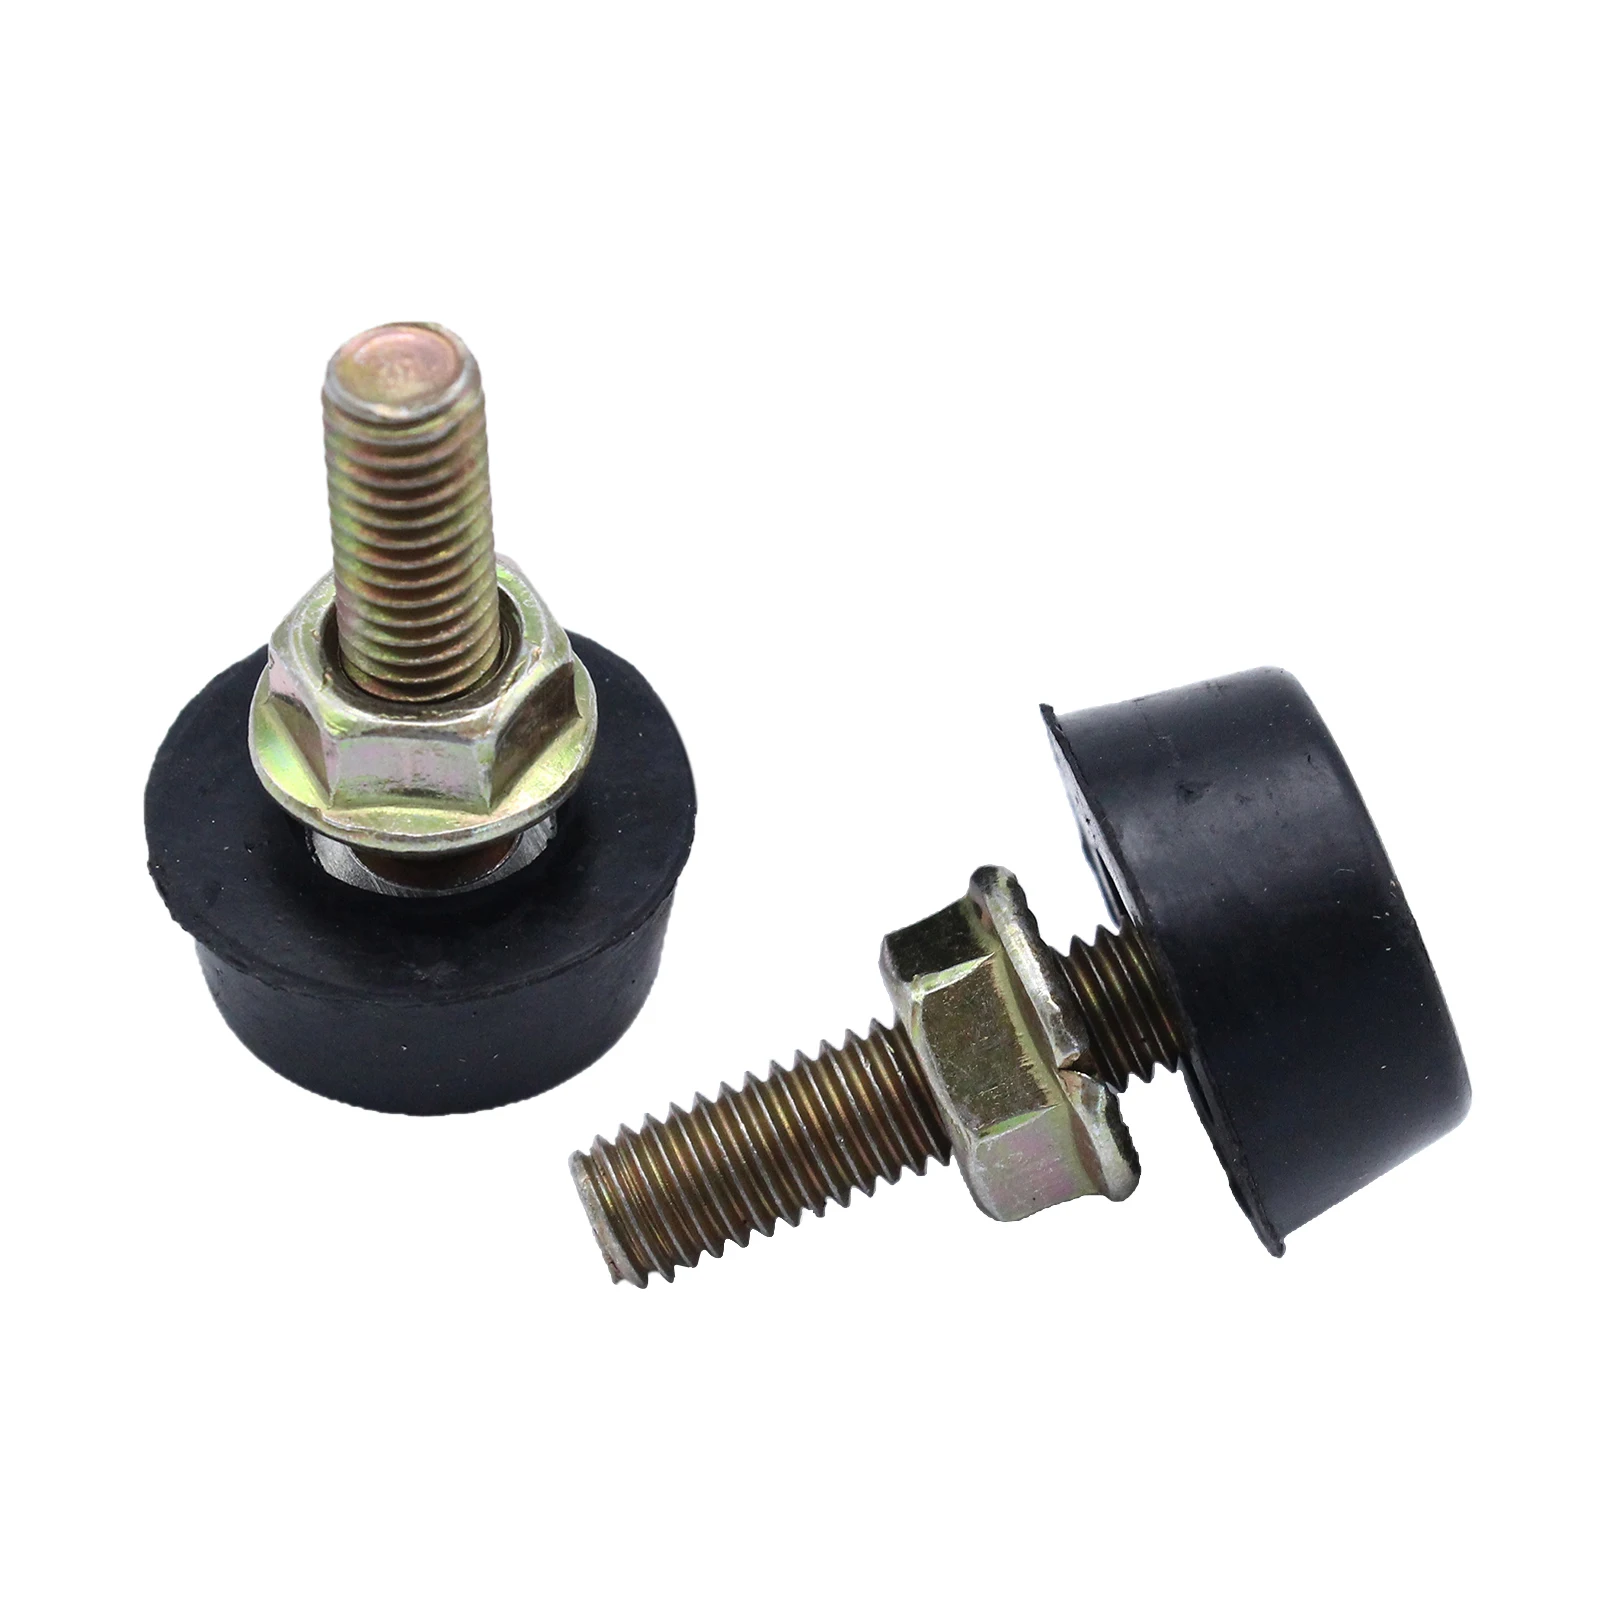 2 Pieces Bonnet Stop Adjuster fits for Ford Maverick 62840-H8500 BSANS1GP-1 ,Easy to Install, Professional Accessories